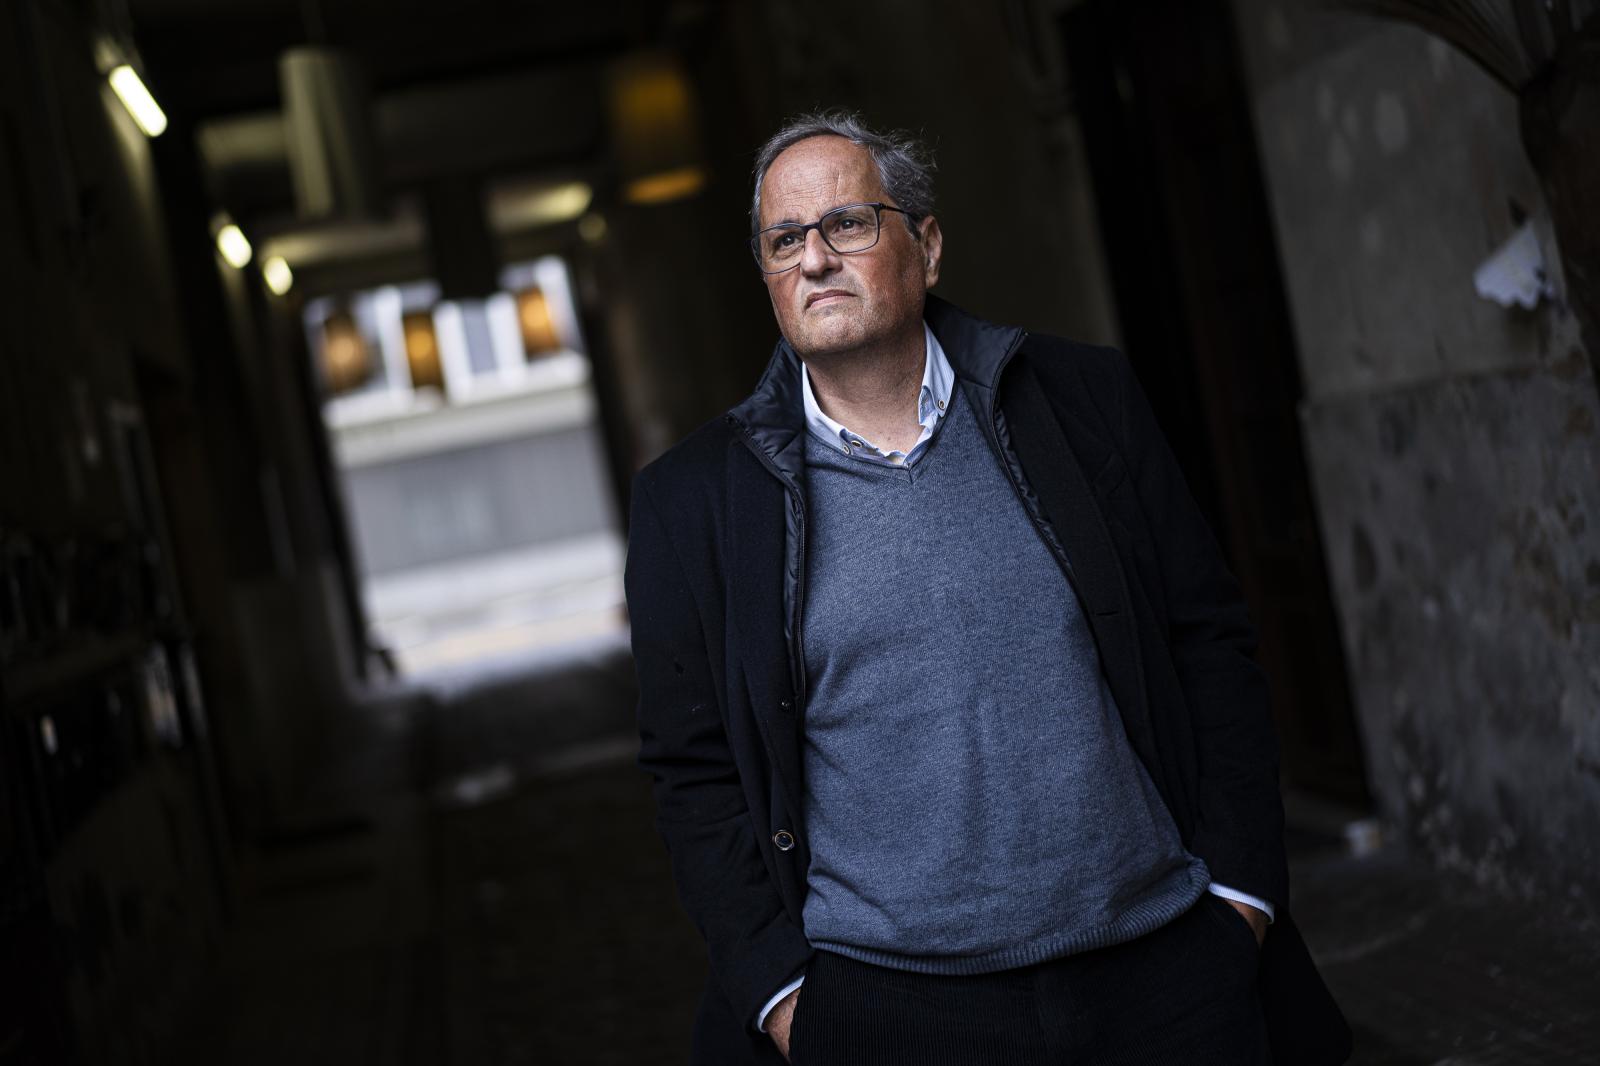 Image from PORTRAITS - Quim Torra is a Catalan politician, lawyer, editor and...